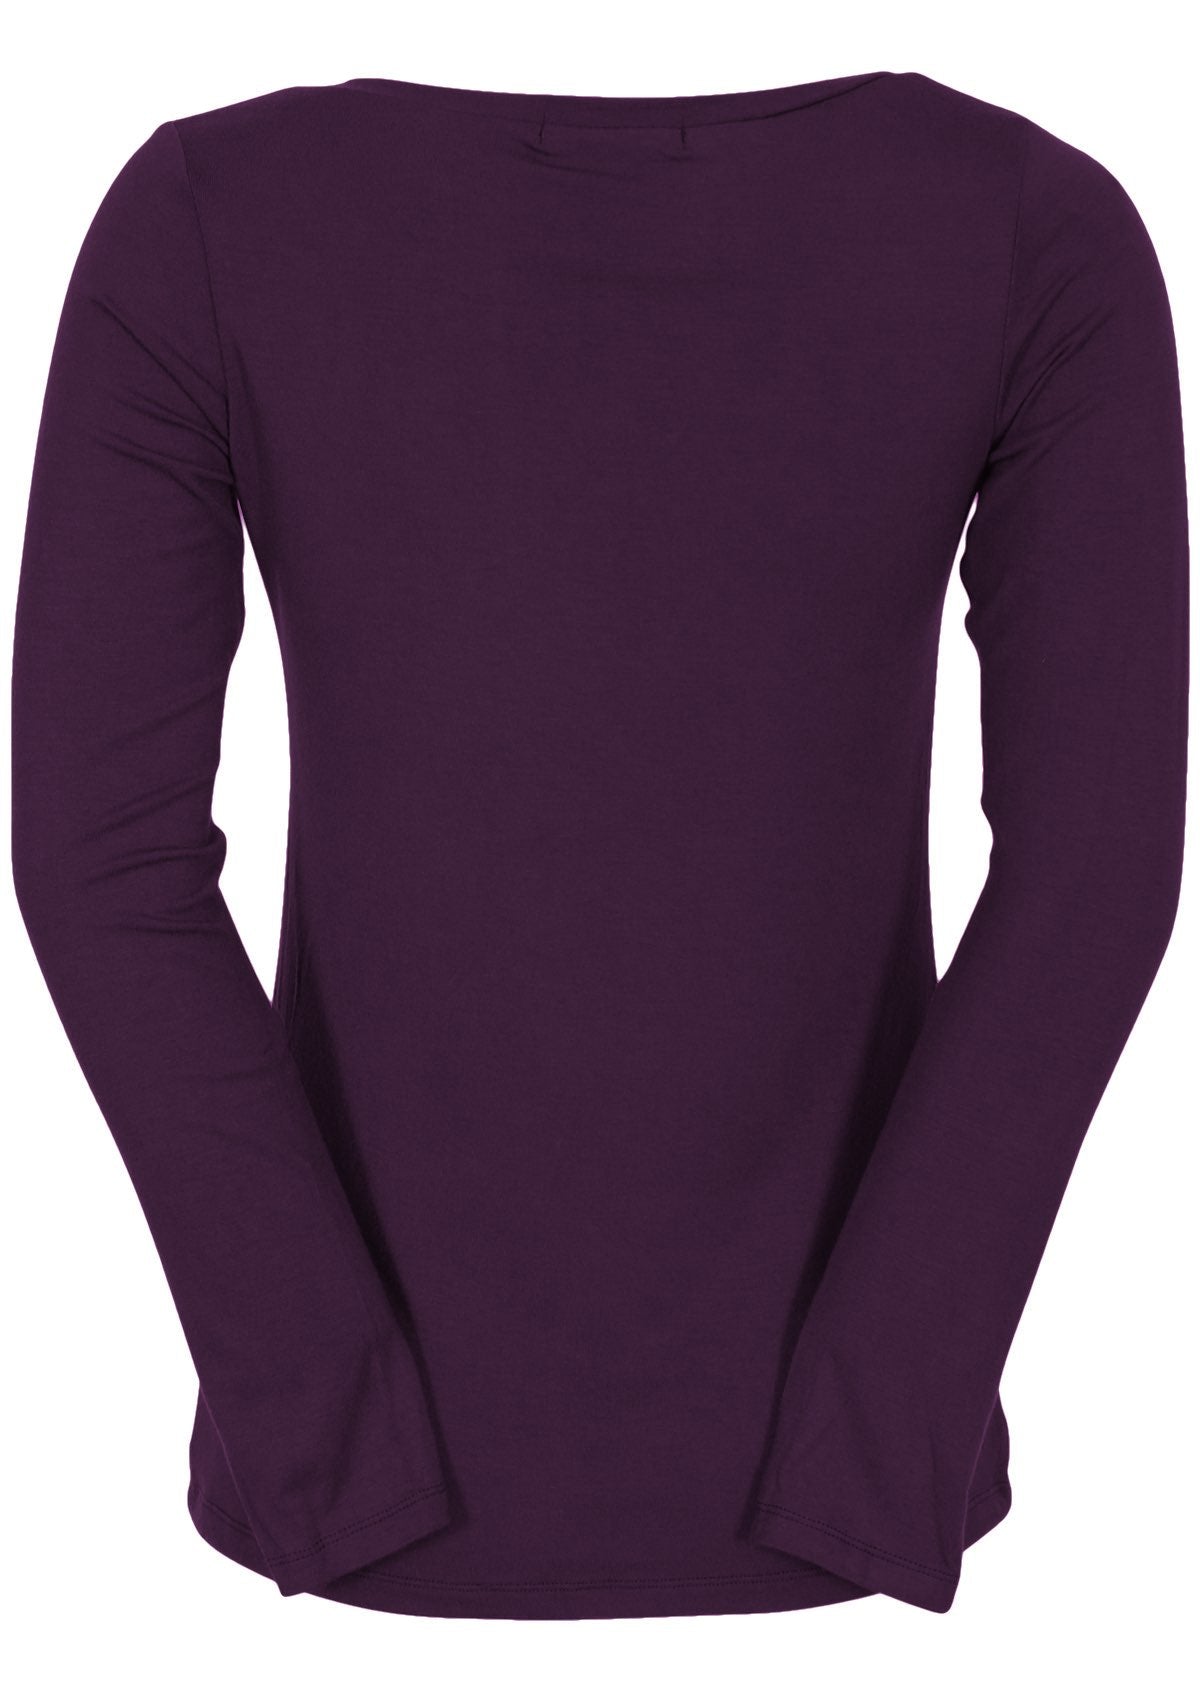 Back view of women's purple long sleeve stretch v-neck soft rayon top.